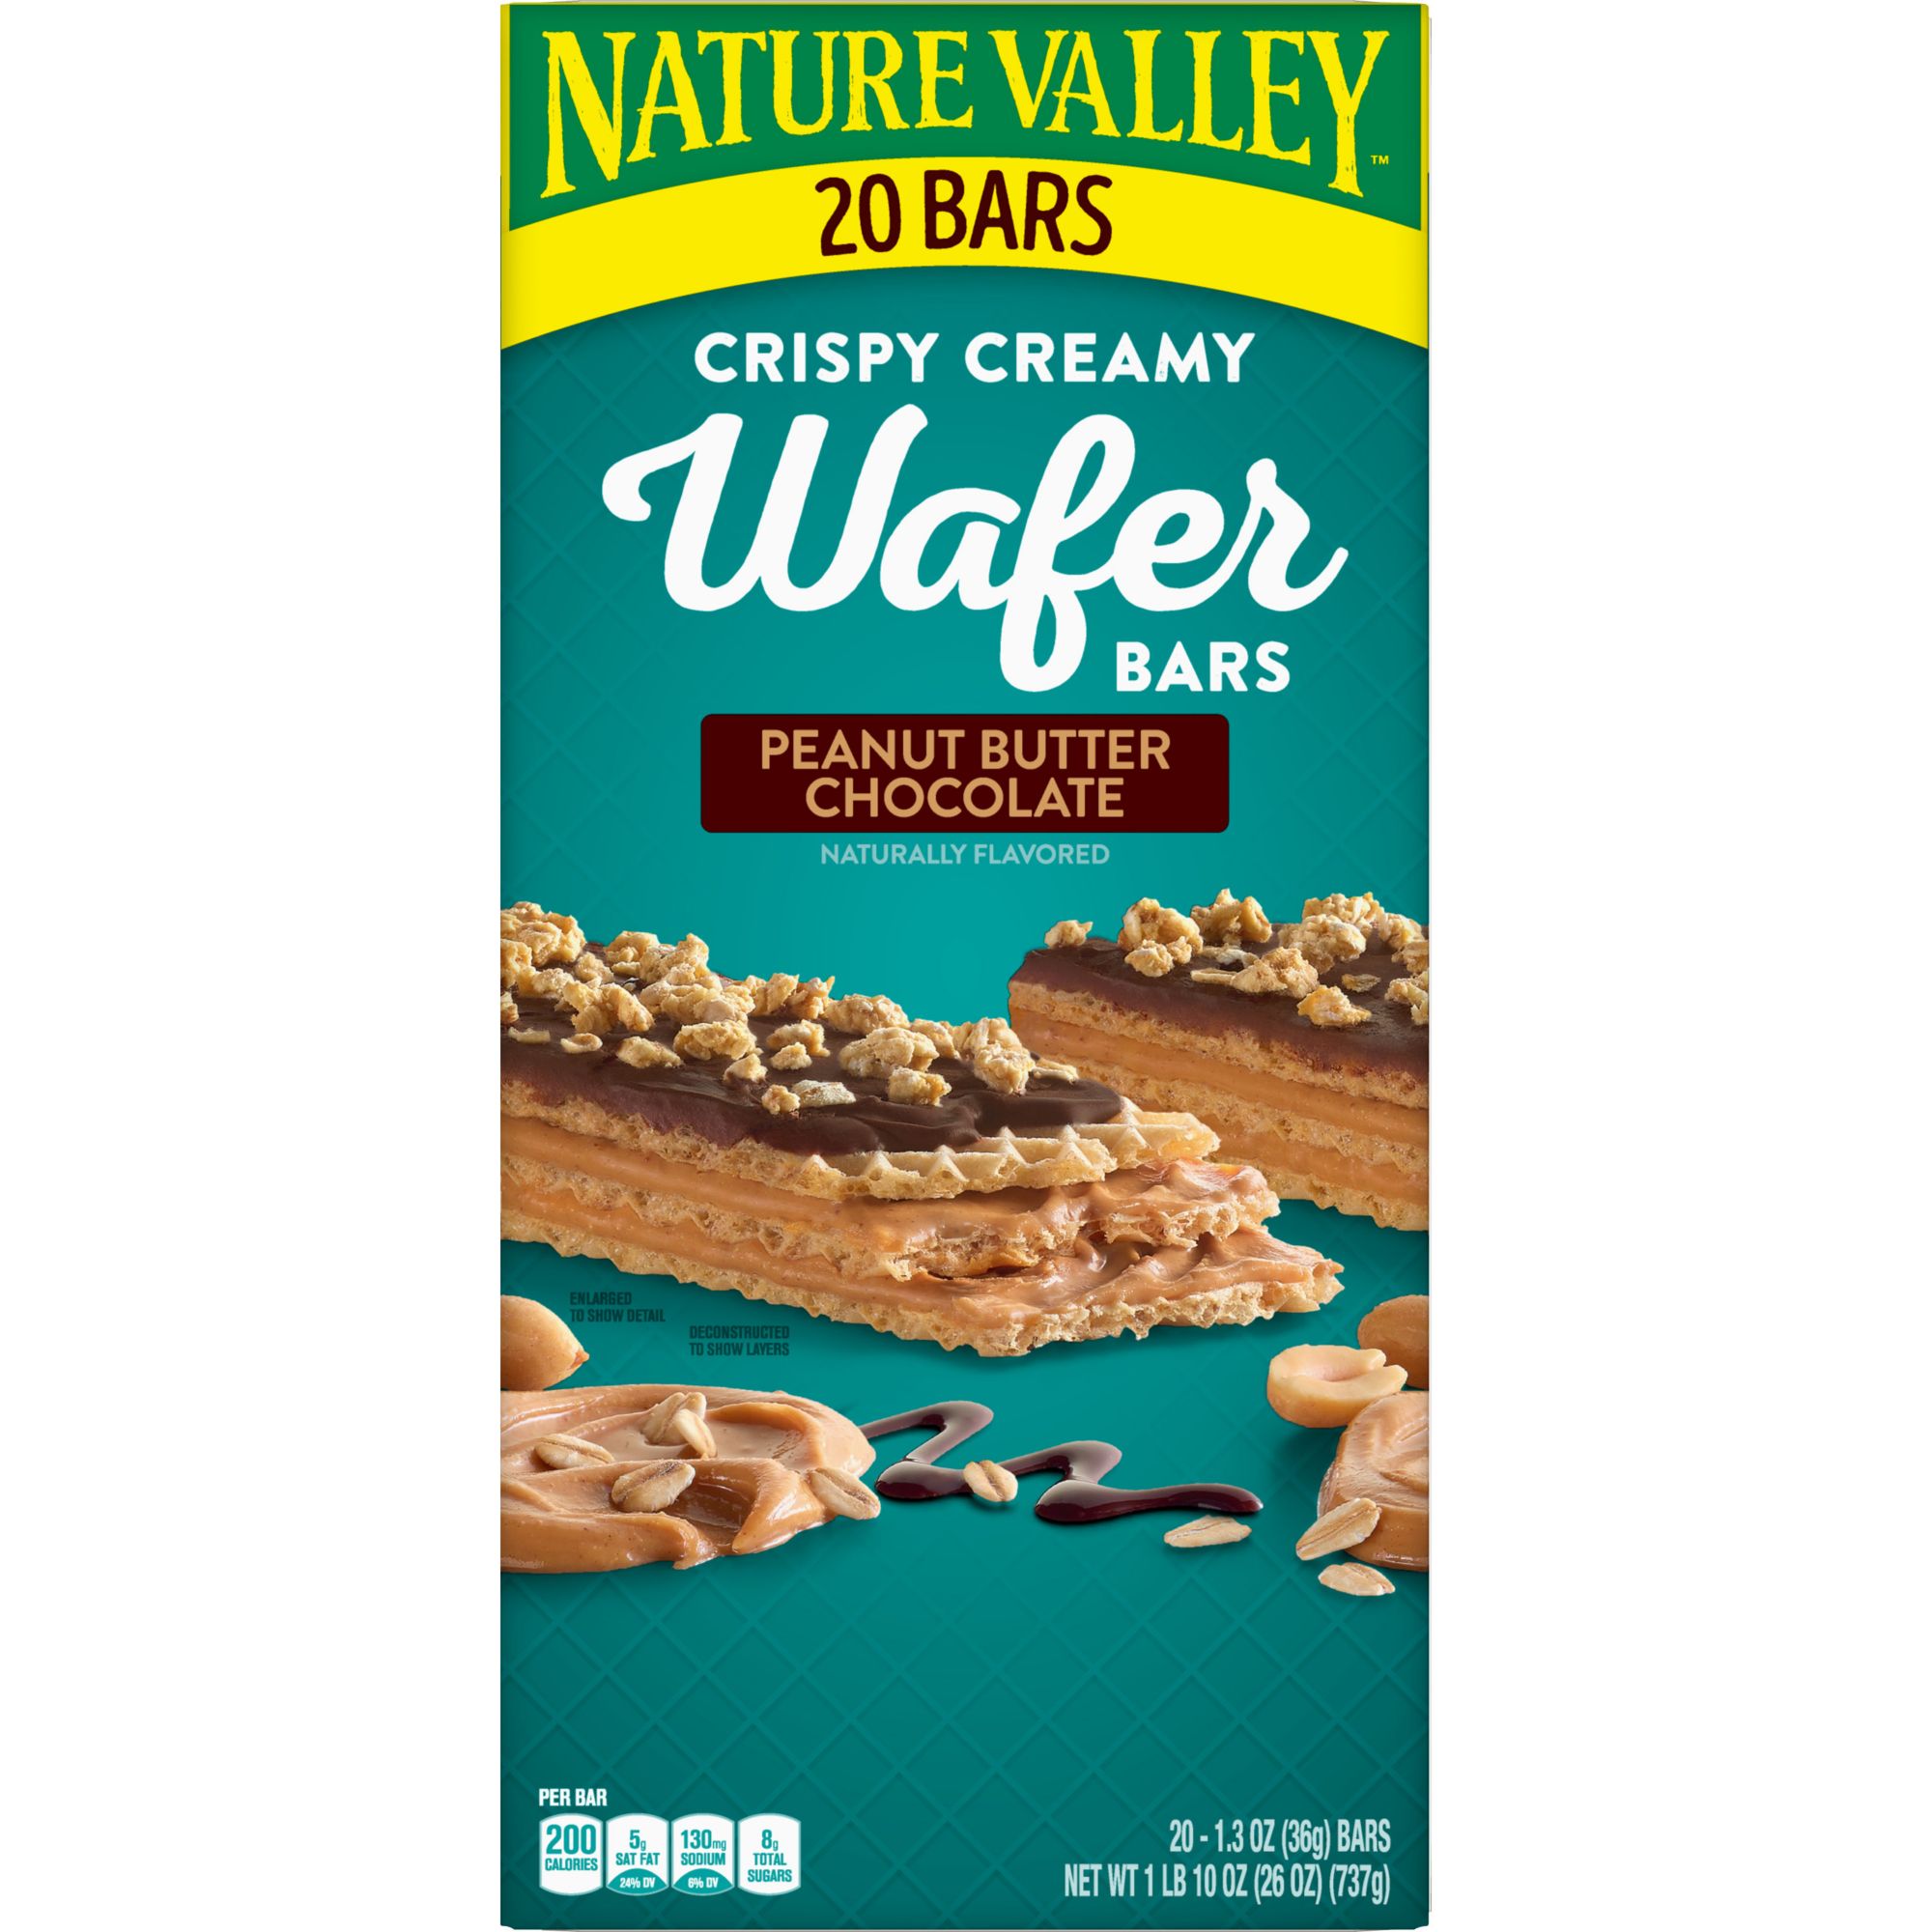 Nature Valley Peanut Butter Crispy Creamy Wafer Bars, 20 ct.